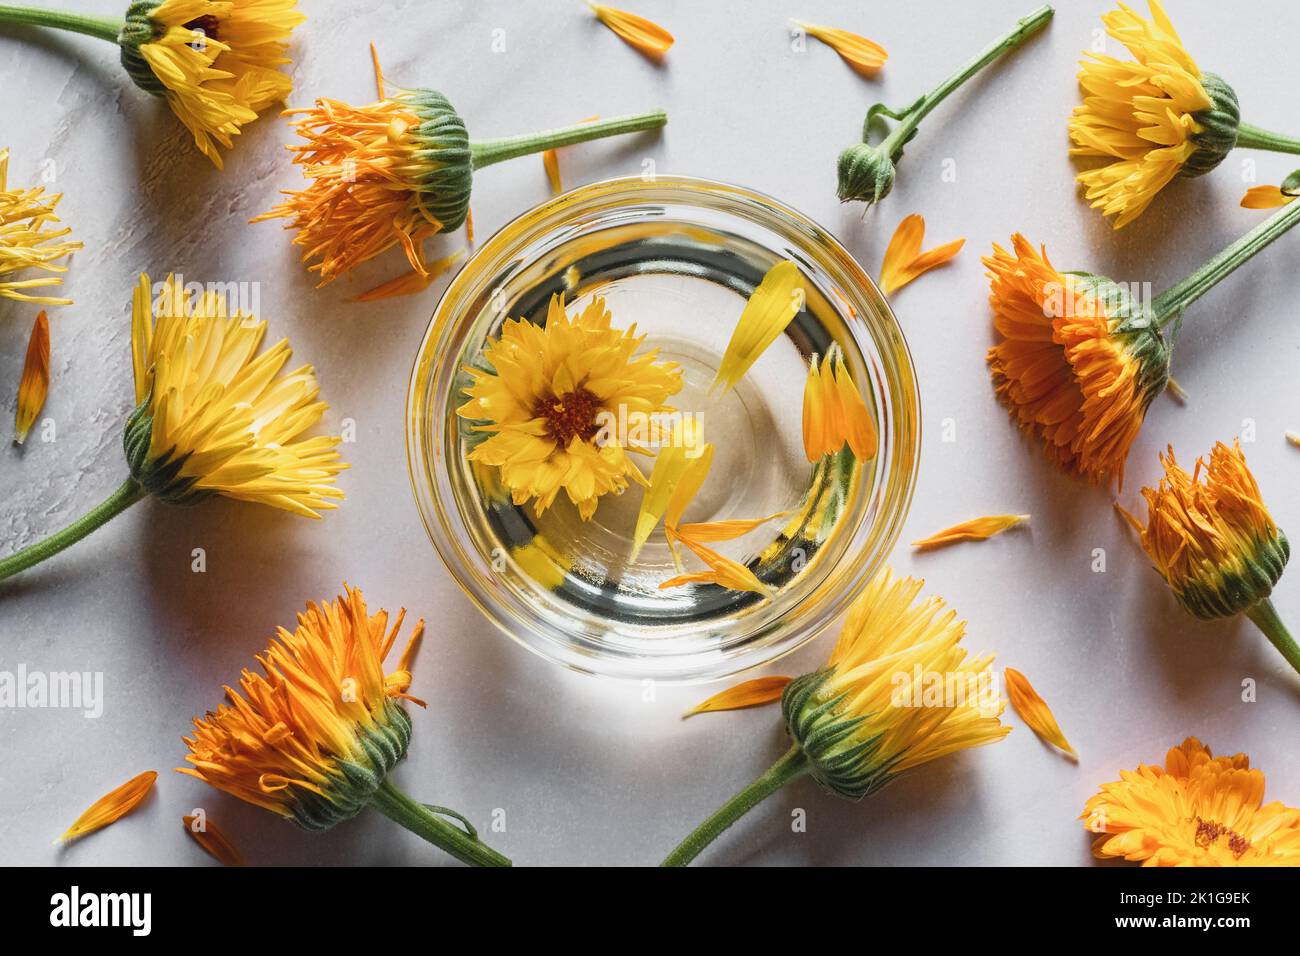 Homemade Calendula infused oil in a bowl, marigold flowers on white background, herbal medicine flat lay Stock Photo